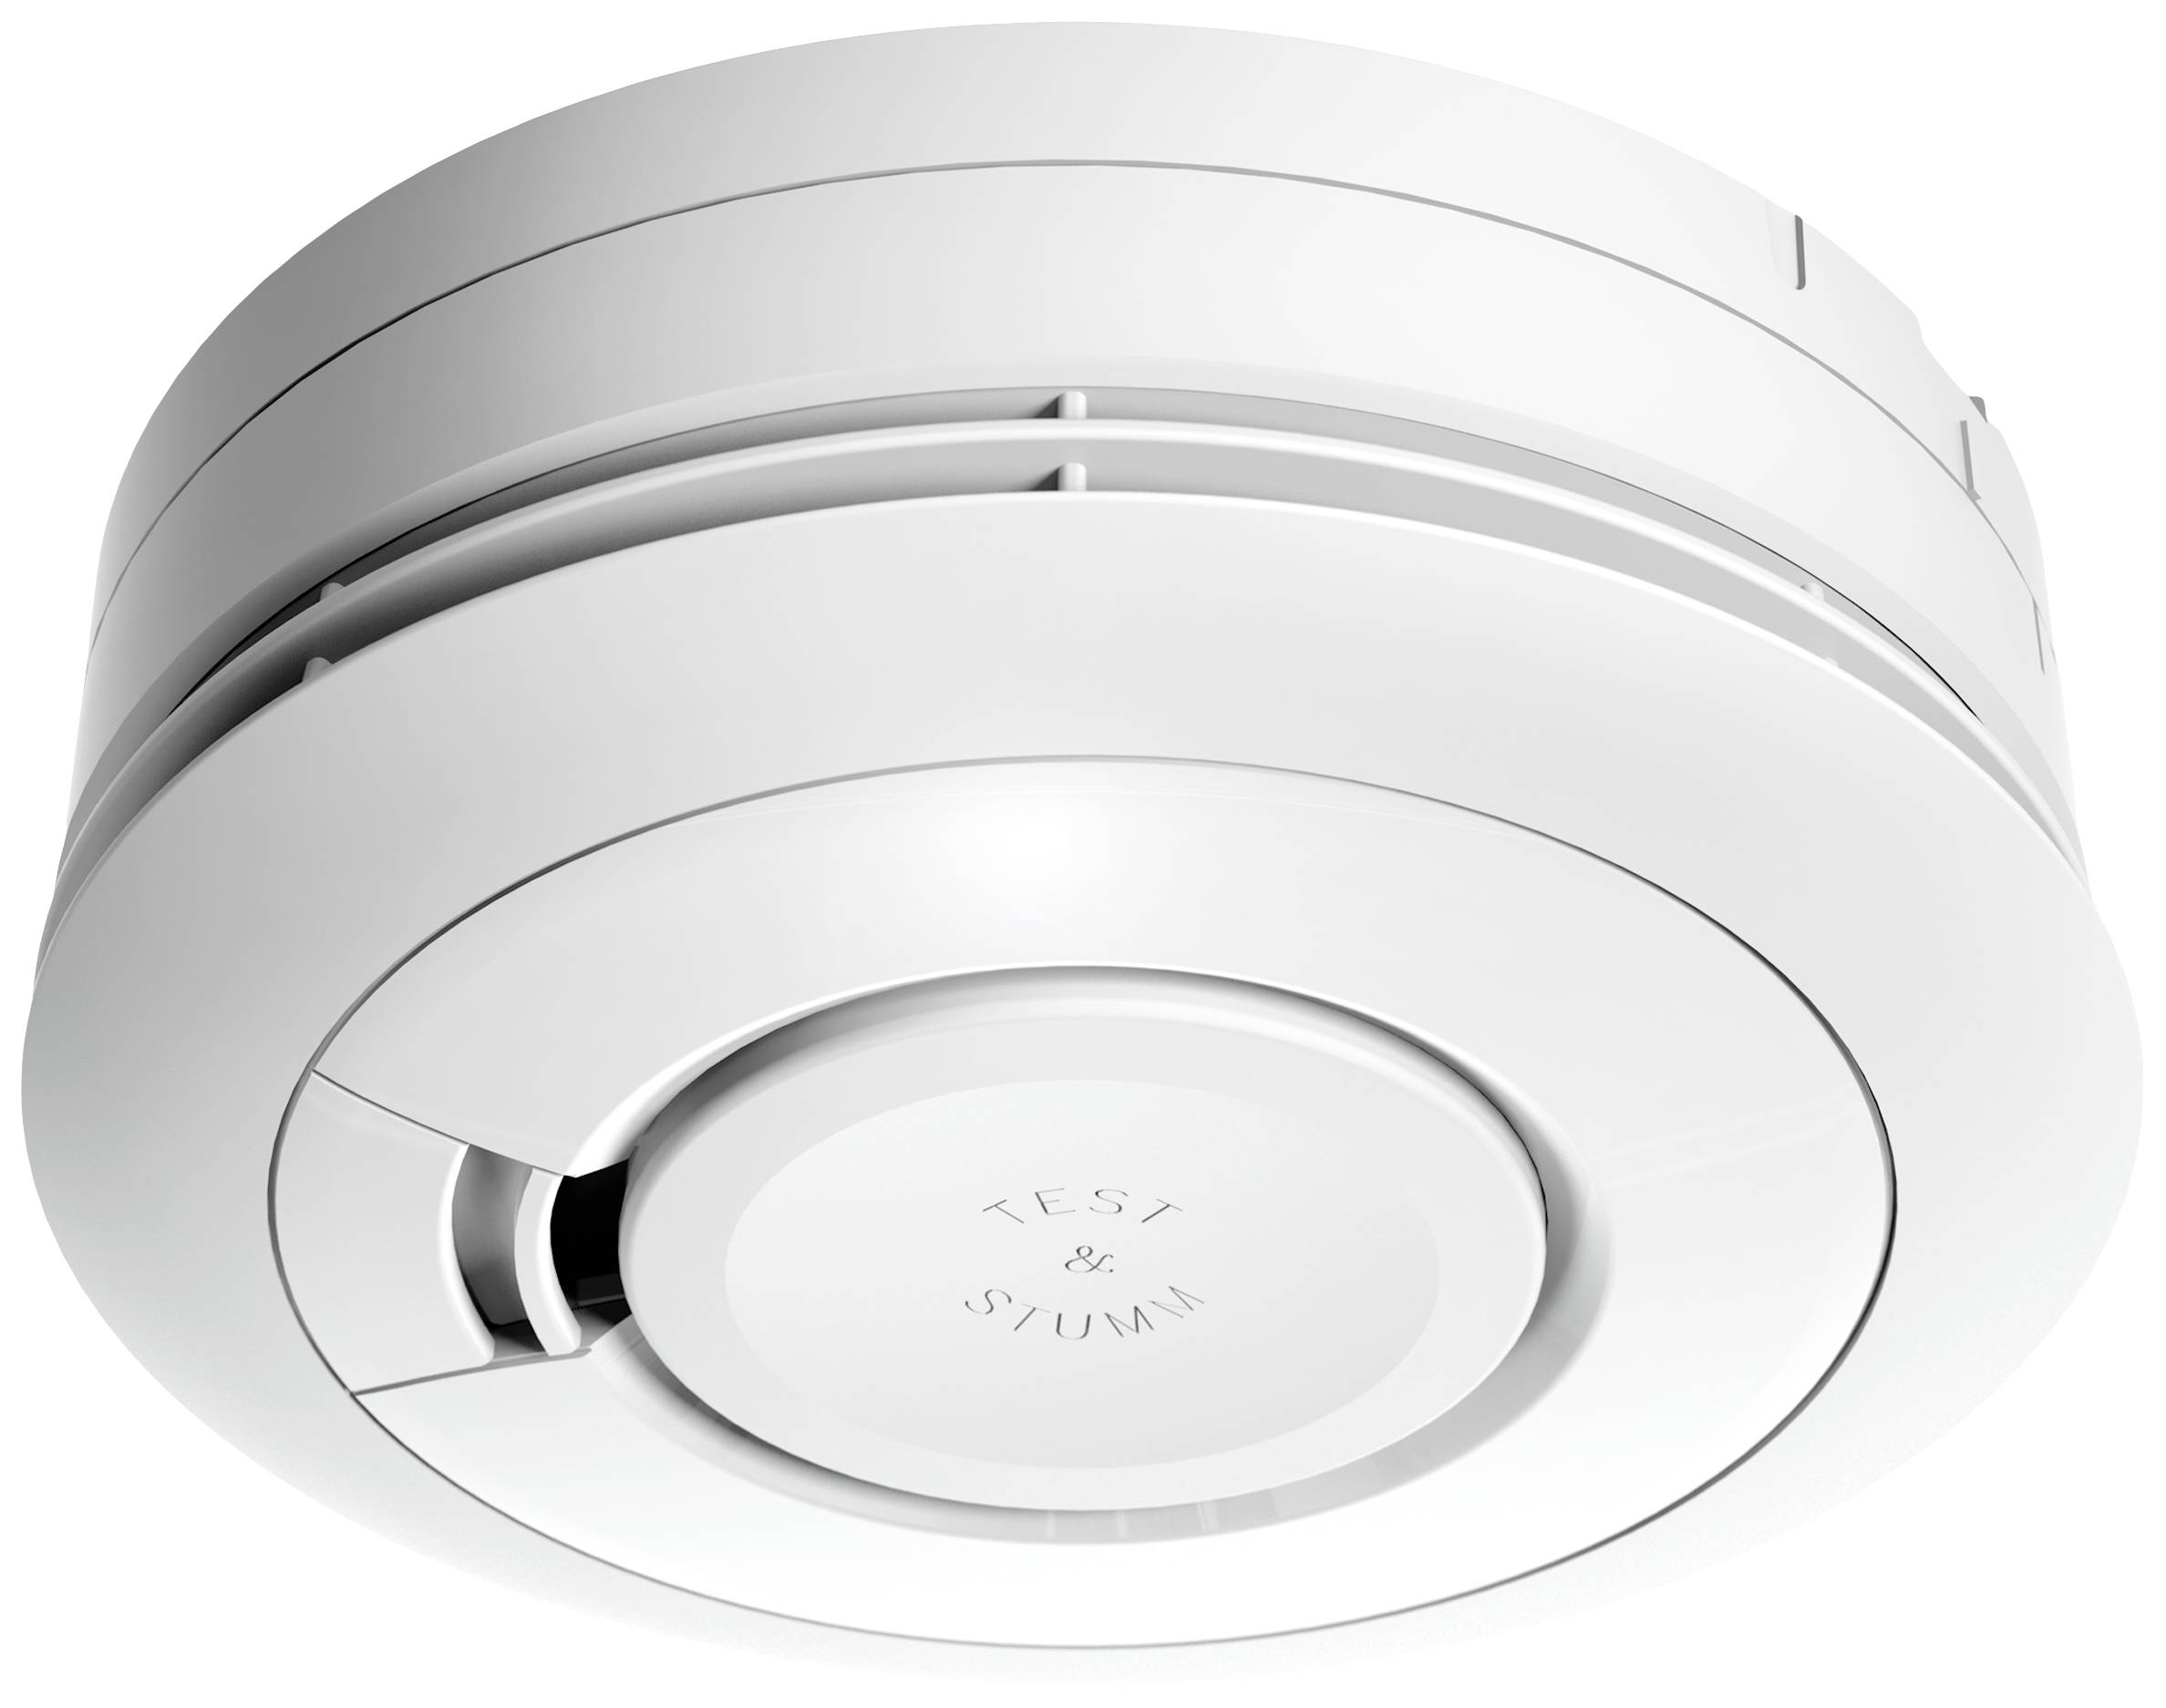 Ei Electronics Ei 650 RF 10 Year Wireless Smoke Detector White Ei 650 RF With Solid Built-In Lithium 3 V Battery, incl. Wireless Module With Solid Built-In Lithium Battery with 10 Year Life 